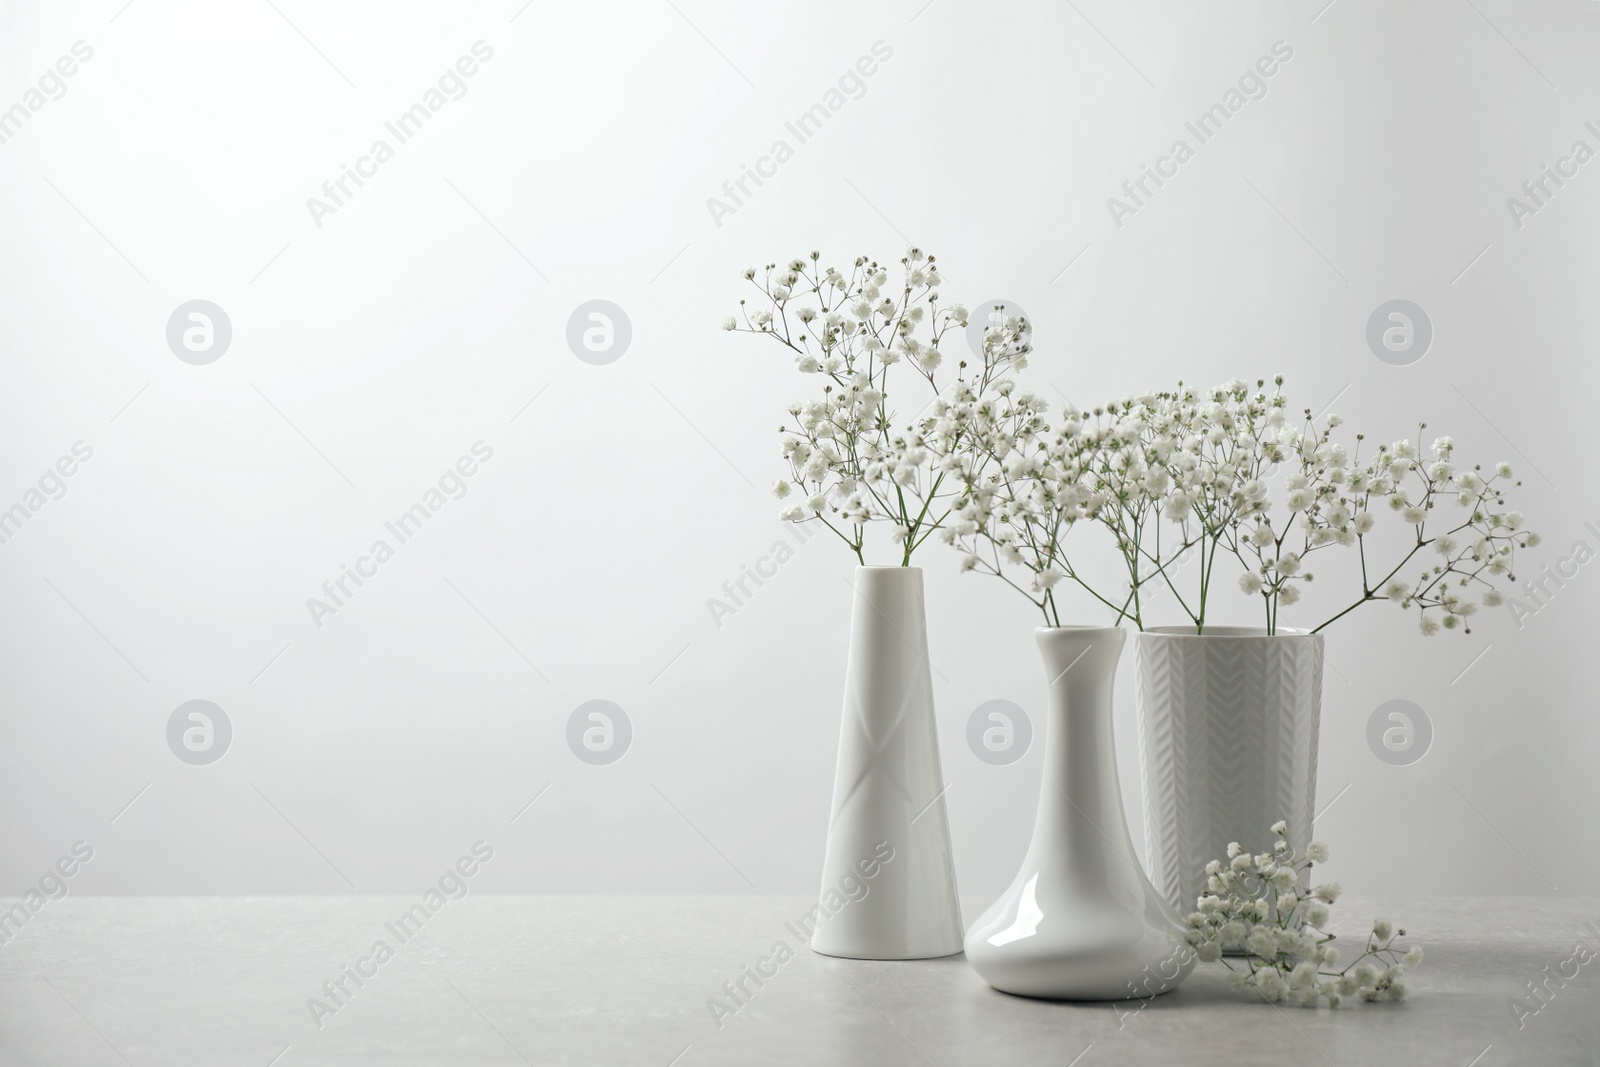 Photo of Gypsophila flowers in vases on table against white background. Space for text